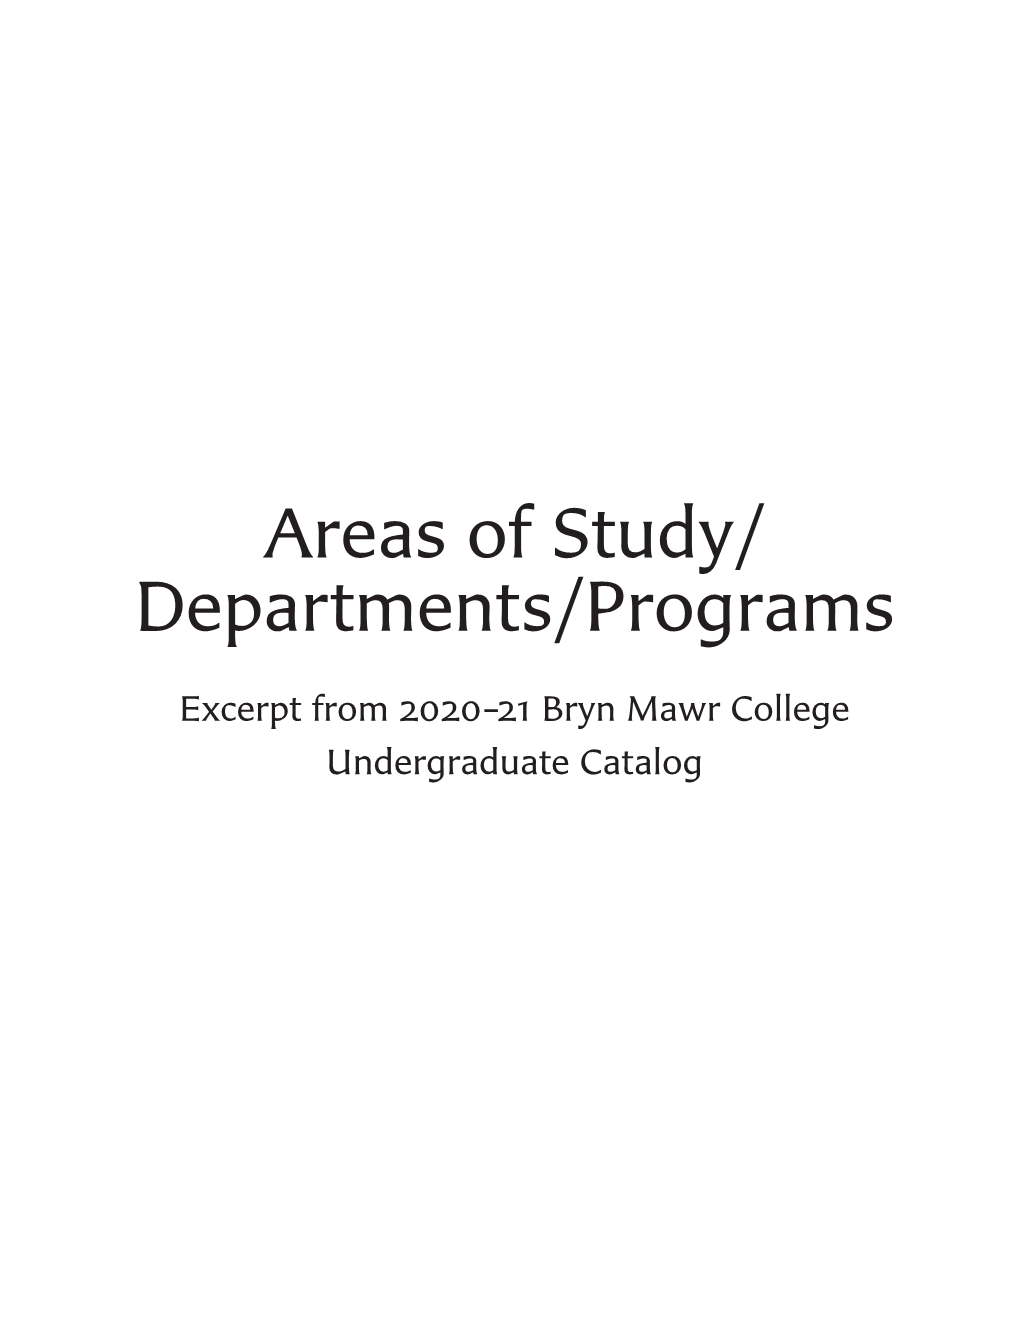 Areas of Study/Departments/Programs (PDF)